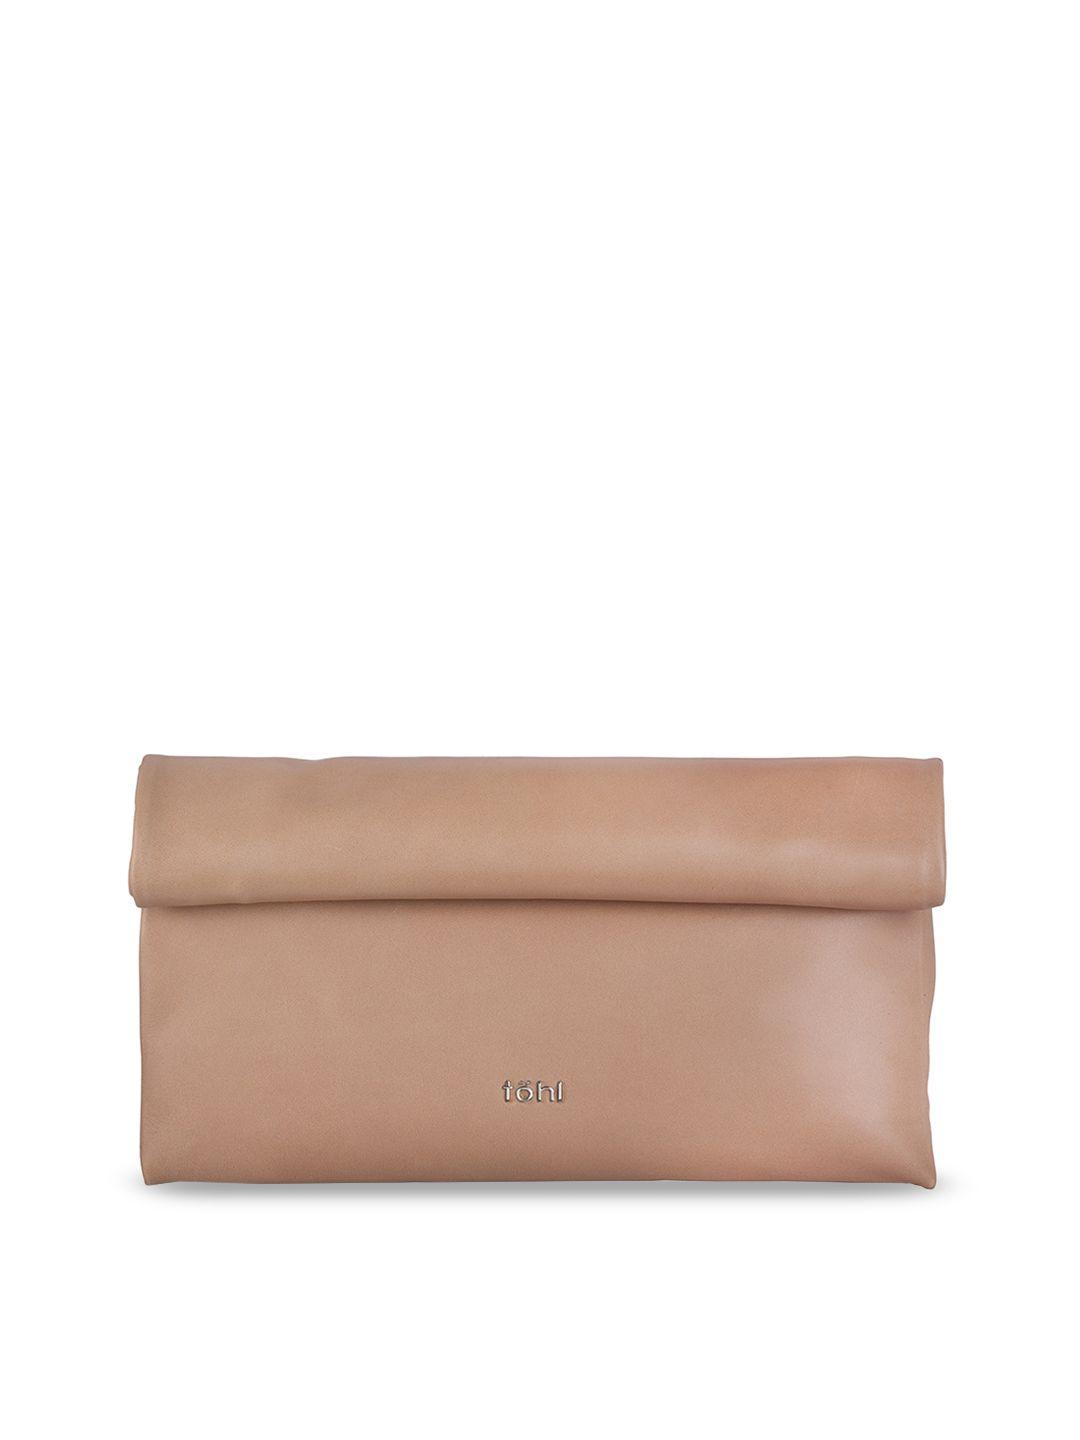 tohl nude-coloured solid clutch